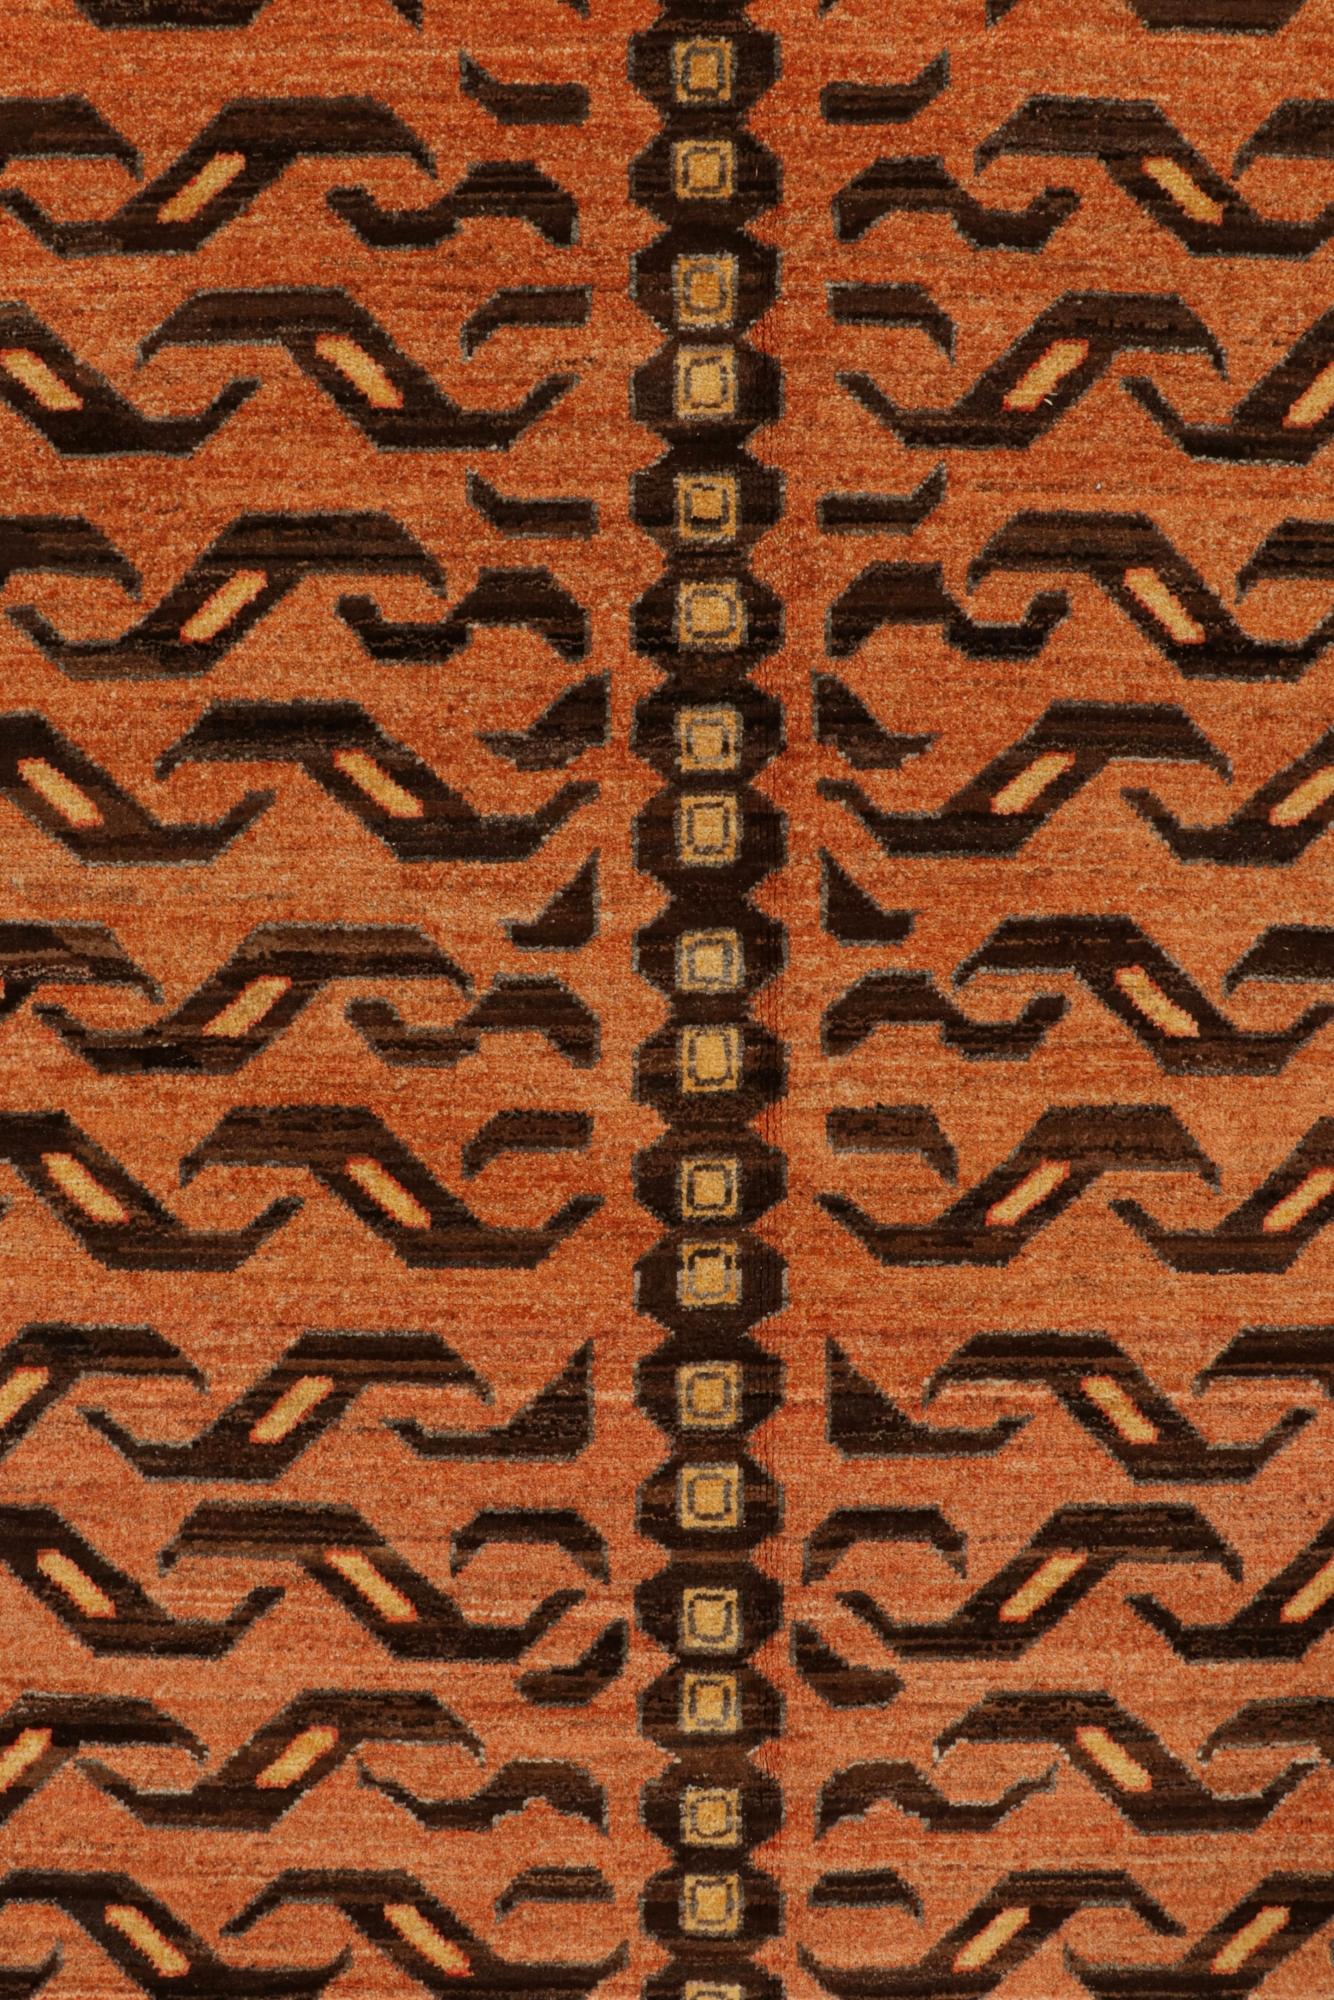 Afghan Rug & Kilim’s Classic-Style Tiger-Skin Rug Design with Orange & Brown Pictorial For Sale